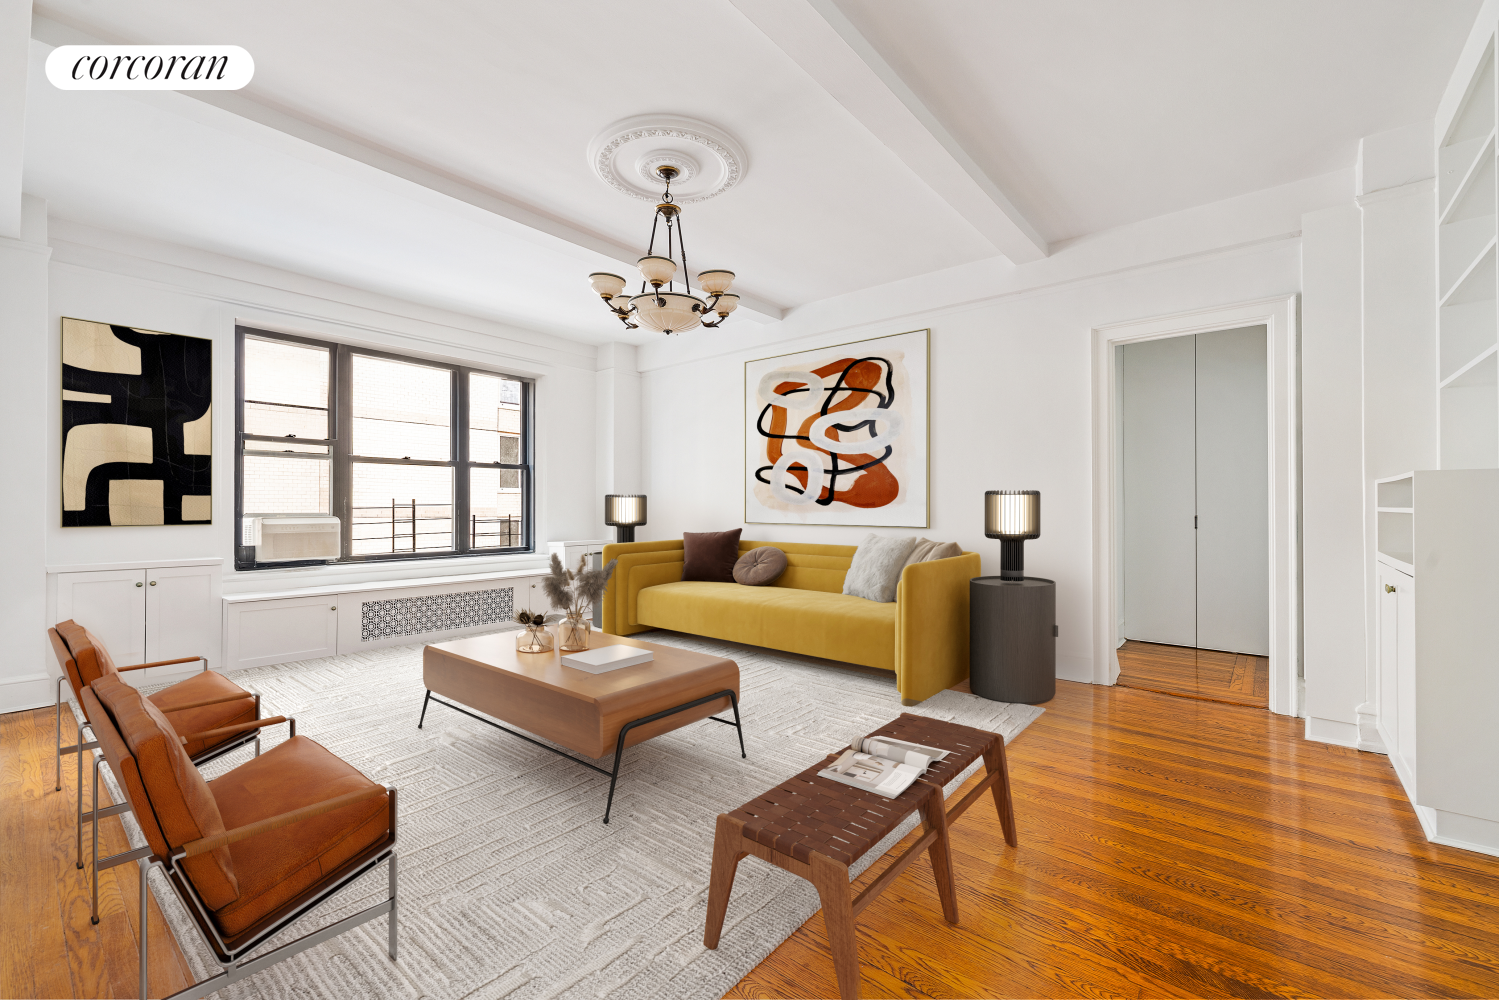 150 West 55th Street 6De, Chelsea And Clinton, Downtown, NYC - 3 Bedrooms  
2.5 Bathrooms  
10 Rooms - 